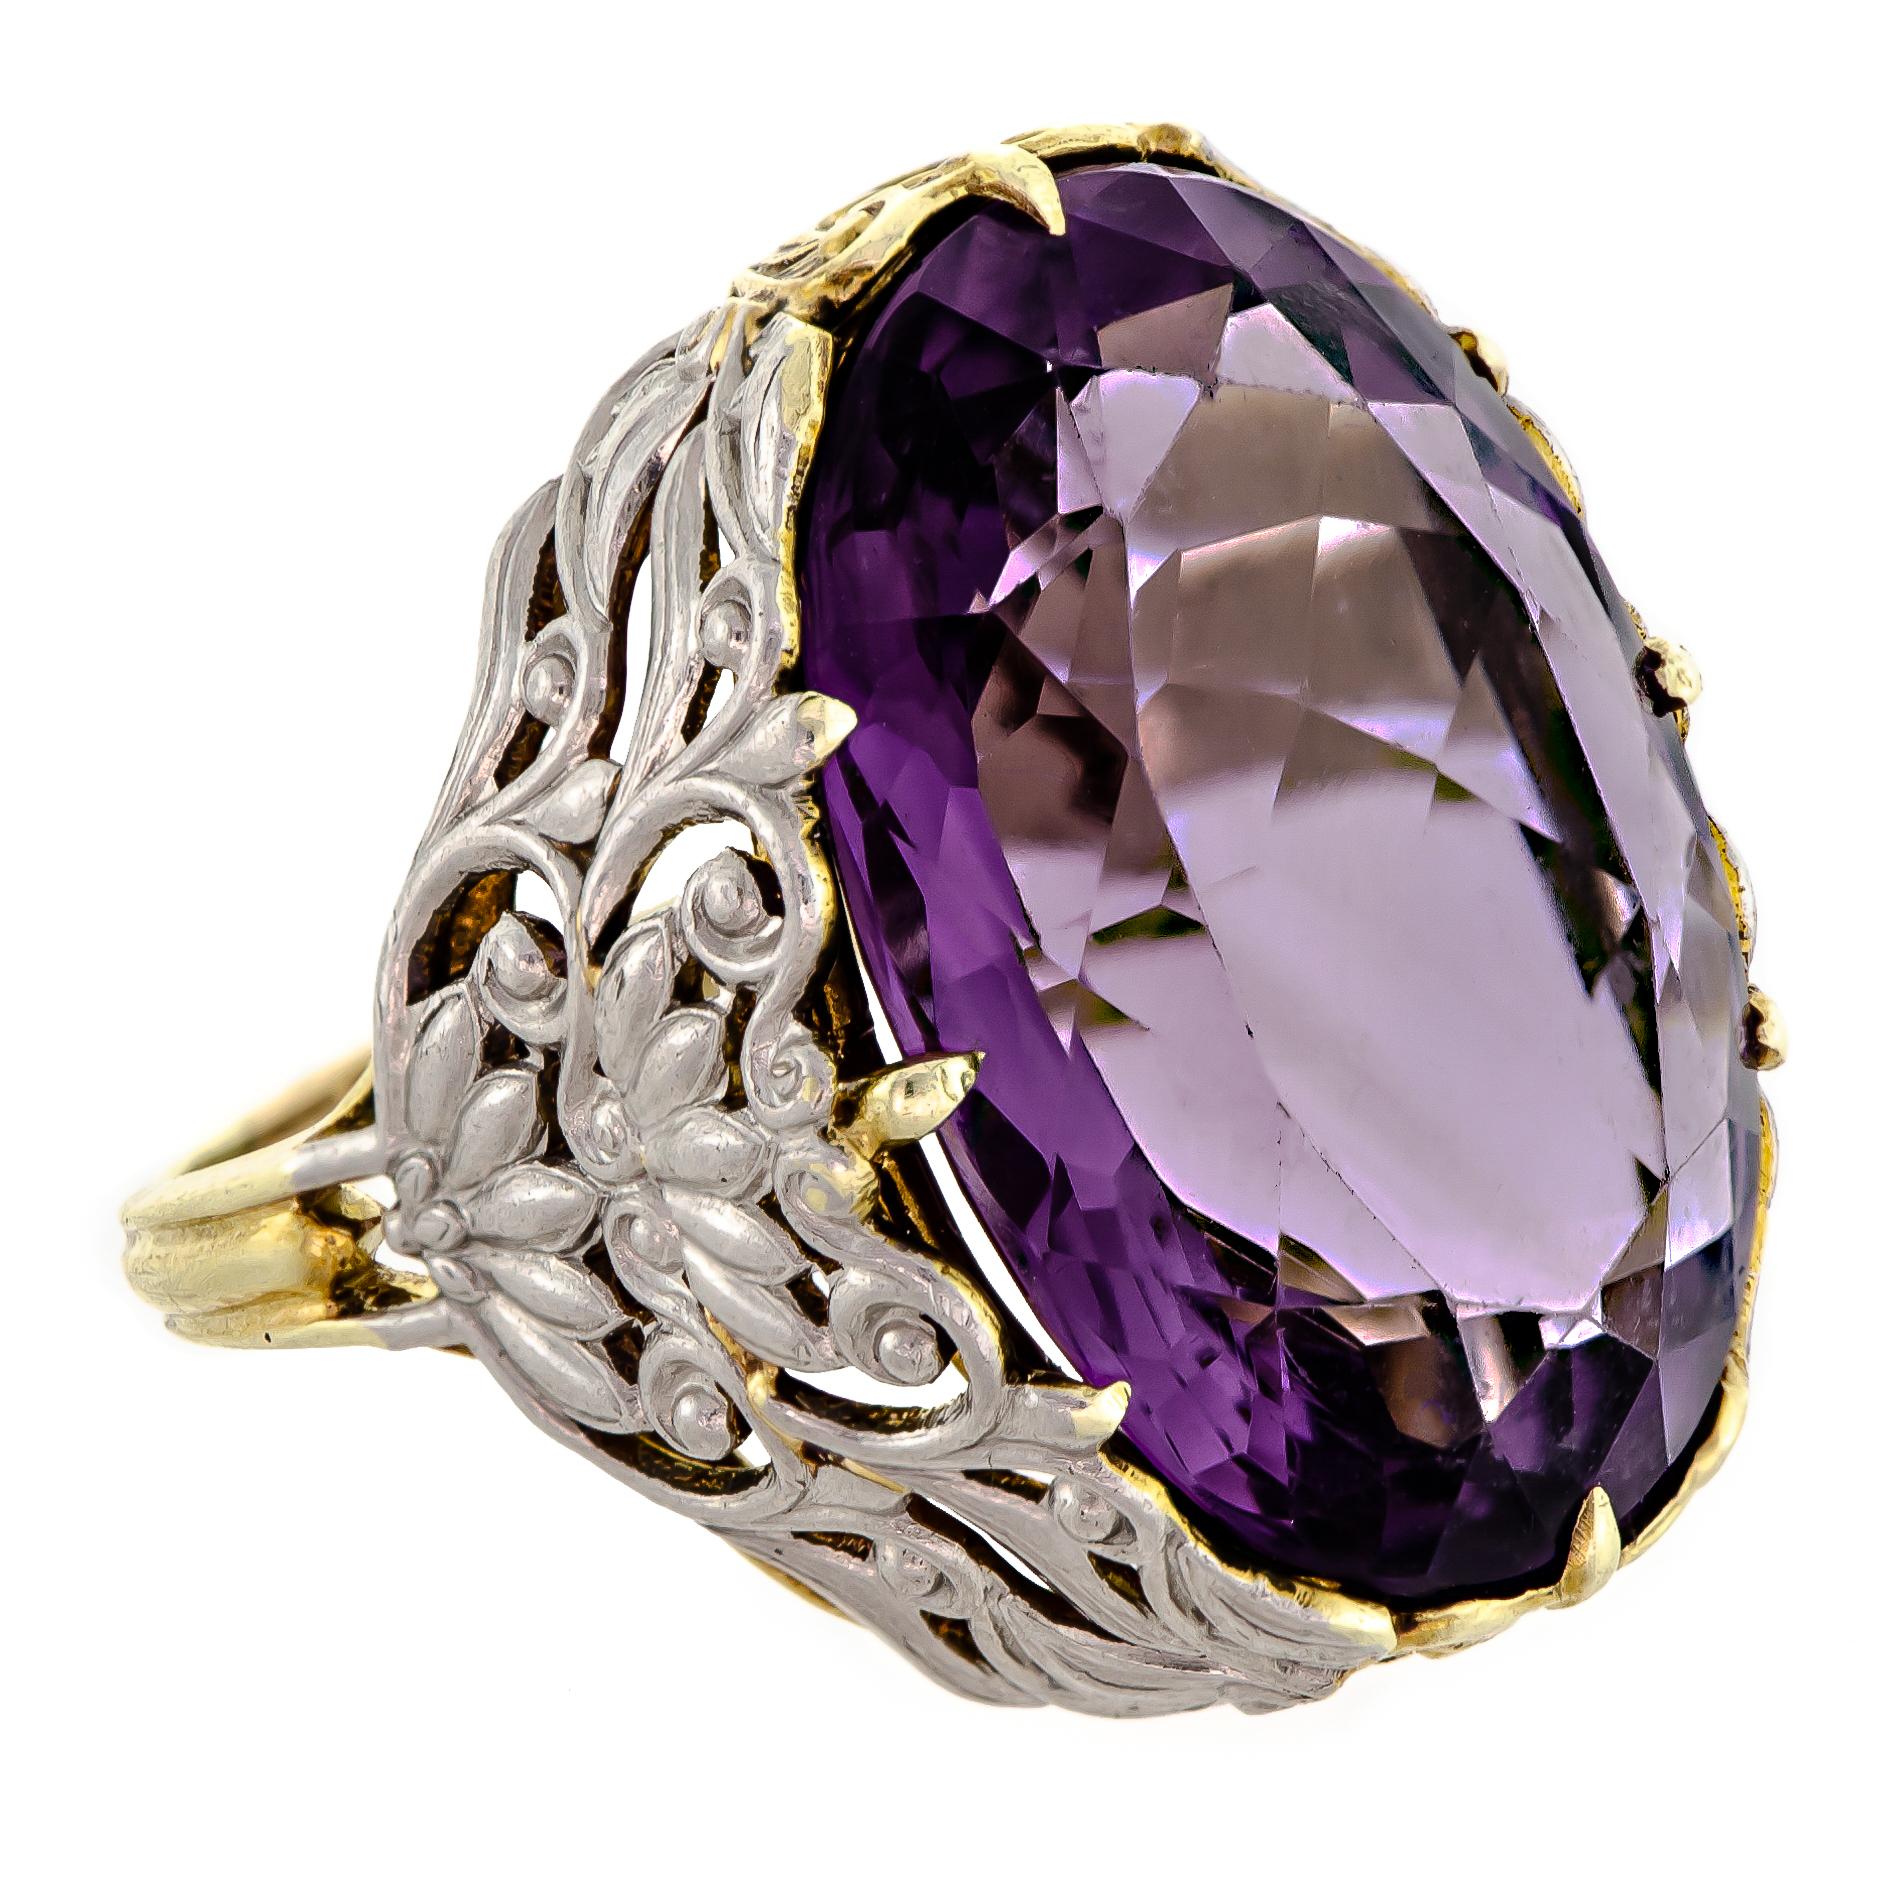 Exquisite antique amethyst and two-colored gold ring - centrally set with one large oval-shaped brilliant-cut rich deep colored purple amethyst measuring approximately 23.1mm x 18mm set into a lovely two-colored gold yellow and white - 14kt frame -